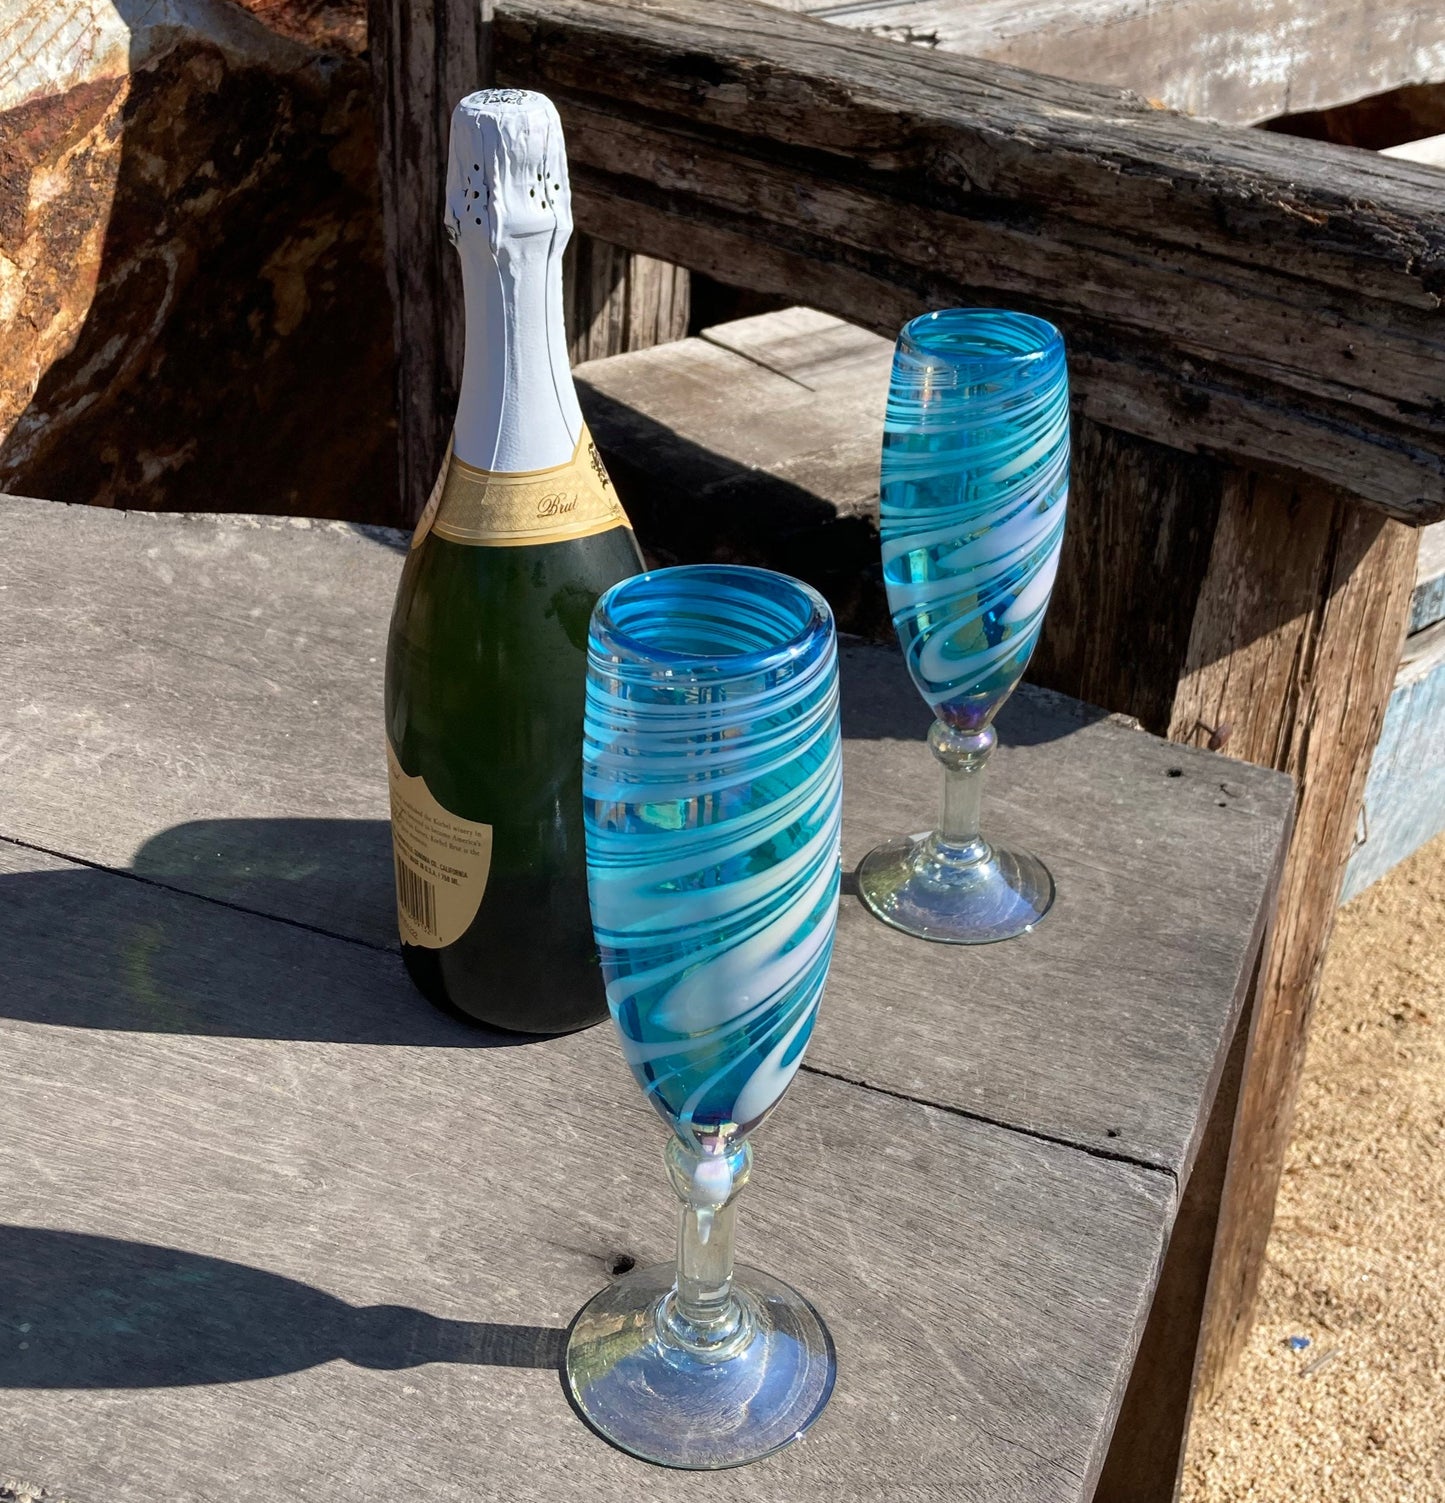 Hand Blown Champagne Glass - Turquoise and White Swirl